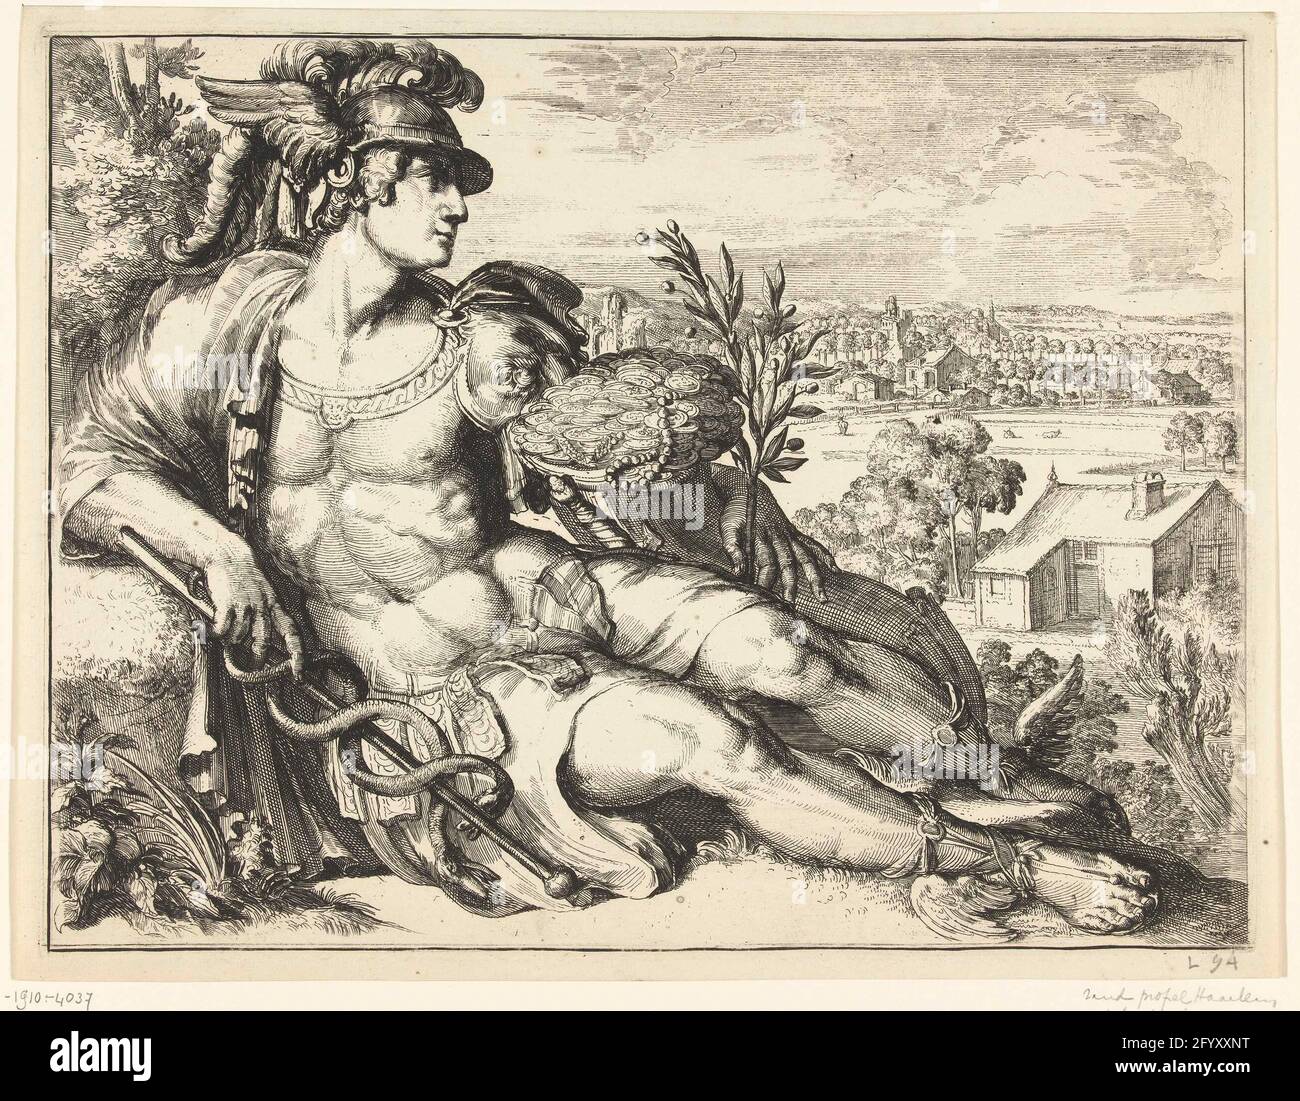 https://c8.alamy.com/comp/2FYXXNT/mercury-map-of-haarlem-and-faces-on-haarlem-mercury-as-a-god-of-trade-with-a-cornucopia-full-of-fines-in-the-left-arm-a-sprig-with-ornamental-apple-in-the-left-hand-and-his-staff-in-the-right-hand-this-magazine-is-part-of-a-comprehensive-print-with-a-large-map-of-haarlem-surrounded-by-seven-coats-of-arms-a-profile-of-the-city-faces-on-striking-haarlem-buildings-and-shows-of-important-moments-from-haarlem-history-2FYXXNT.jpg